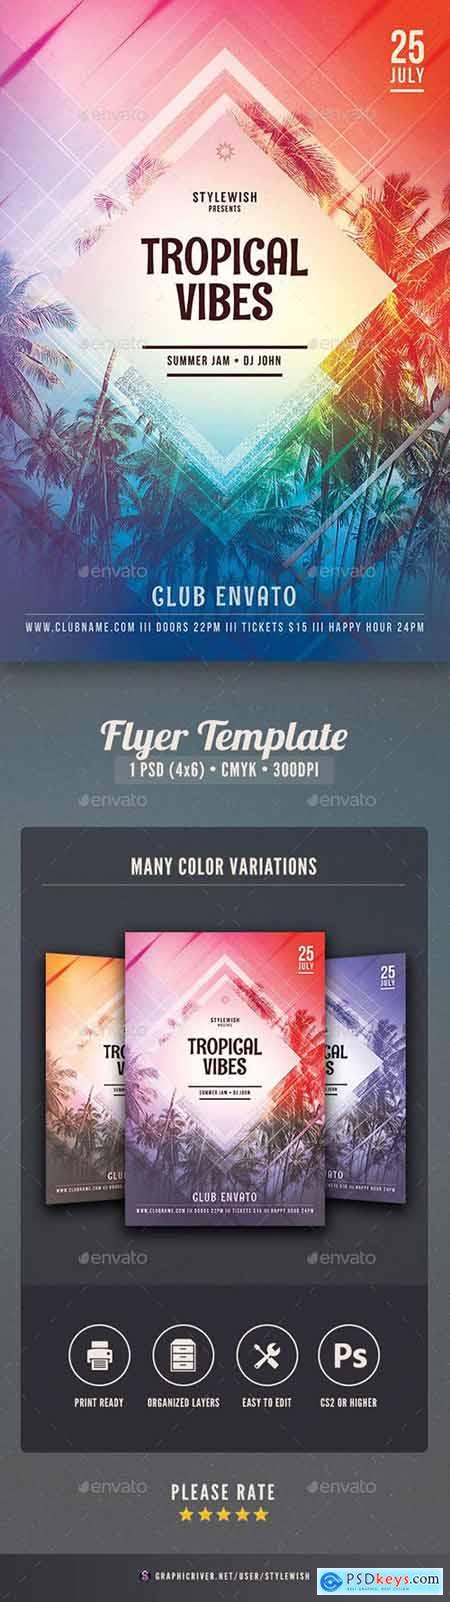 Graphicriver Tropical Vibes Flyer